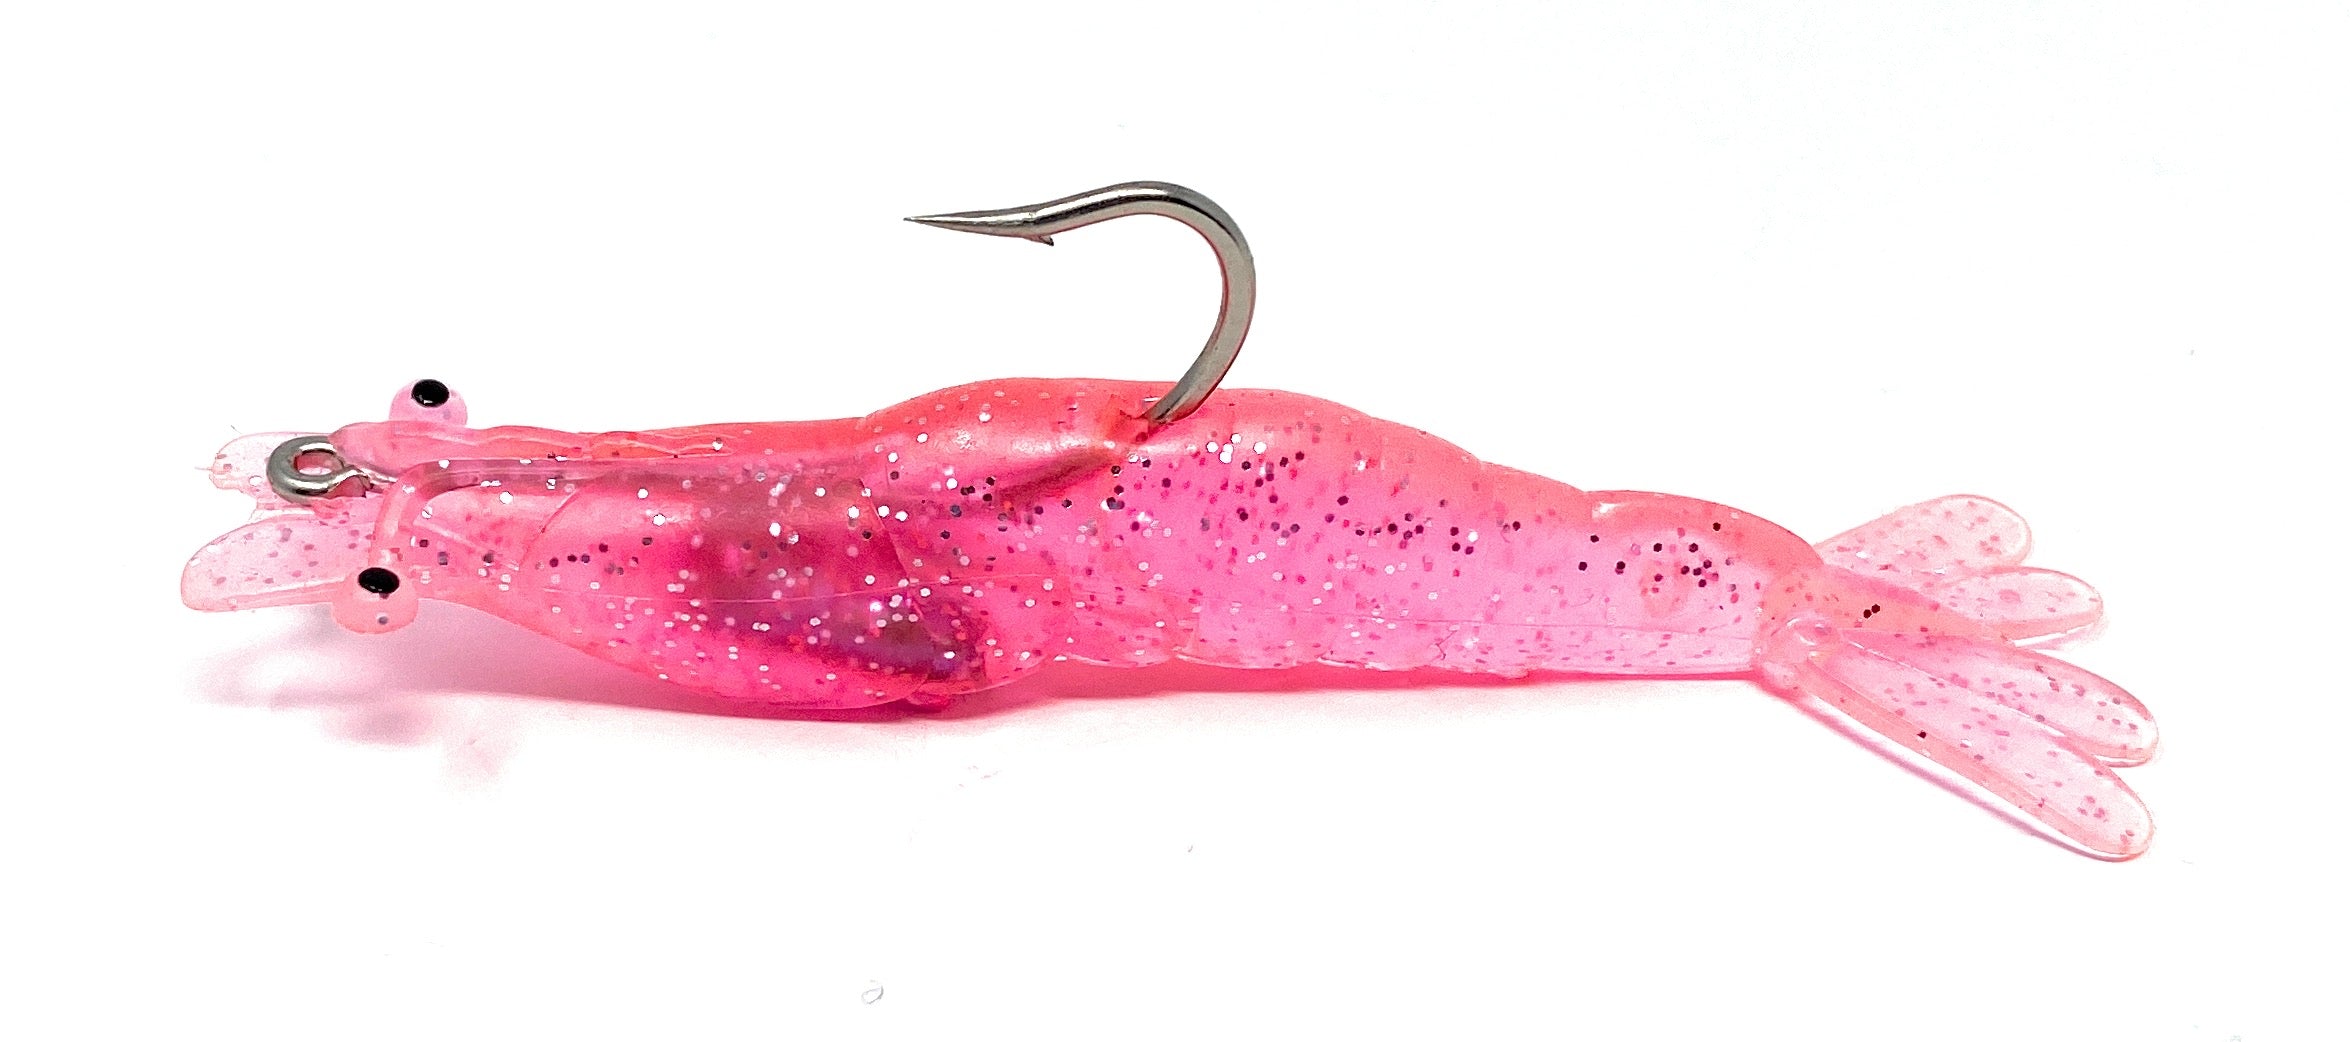 305 Soft Rubber Shrimp Lure Baits 4 Variable Depth. Package of 1. Double  Weigh